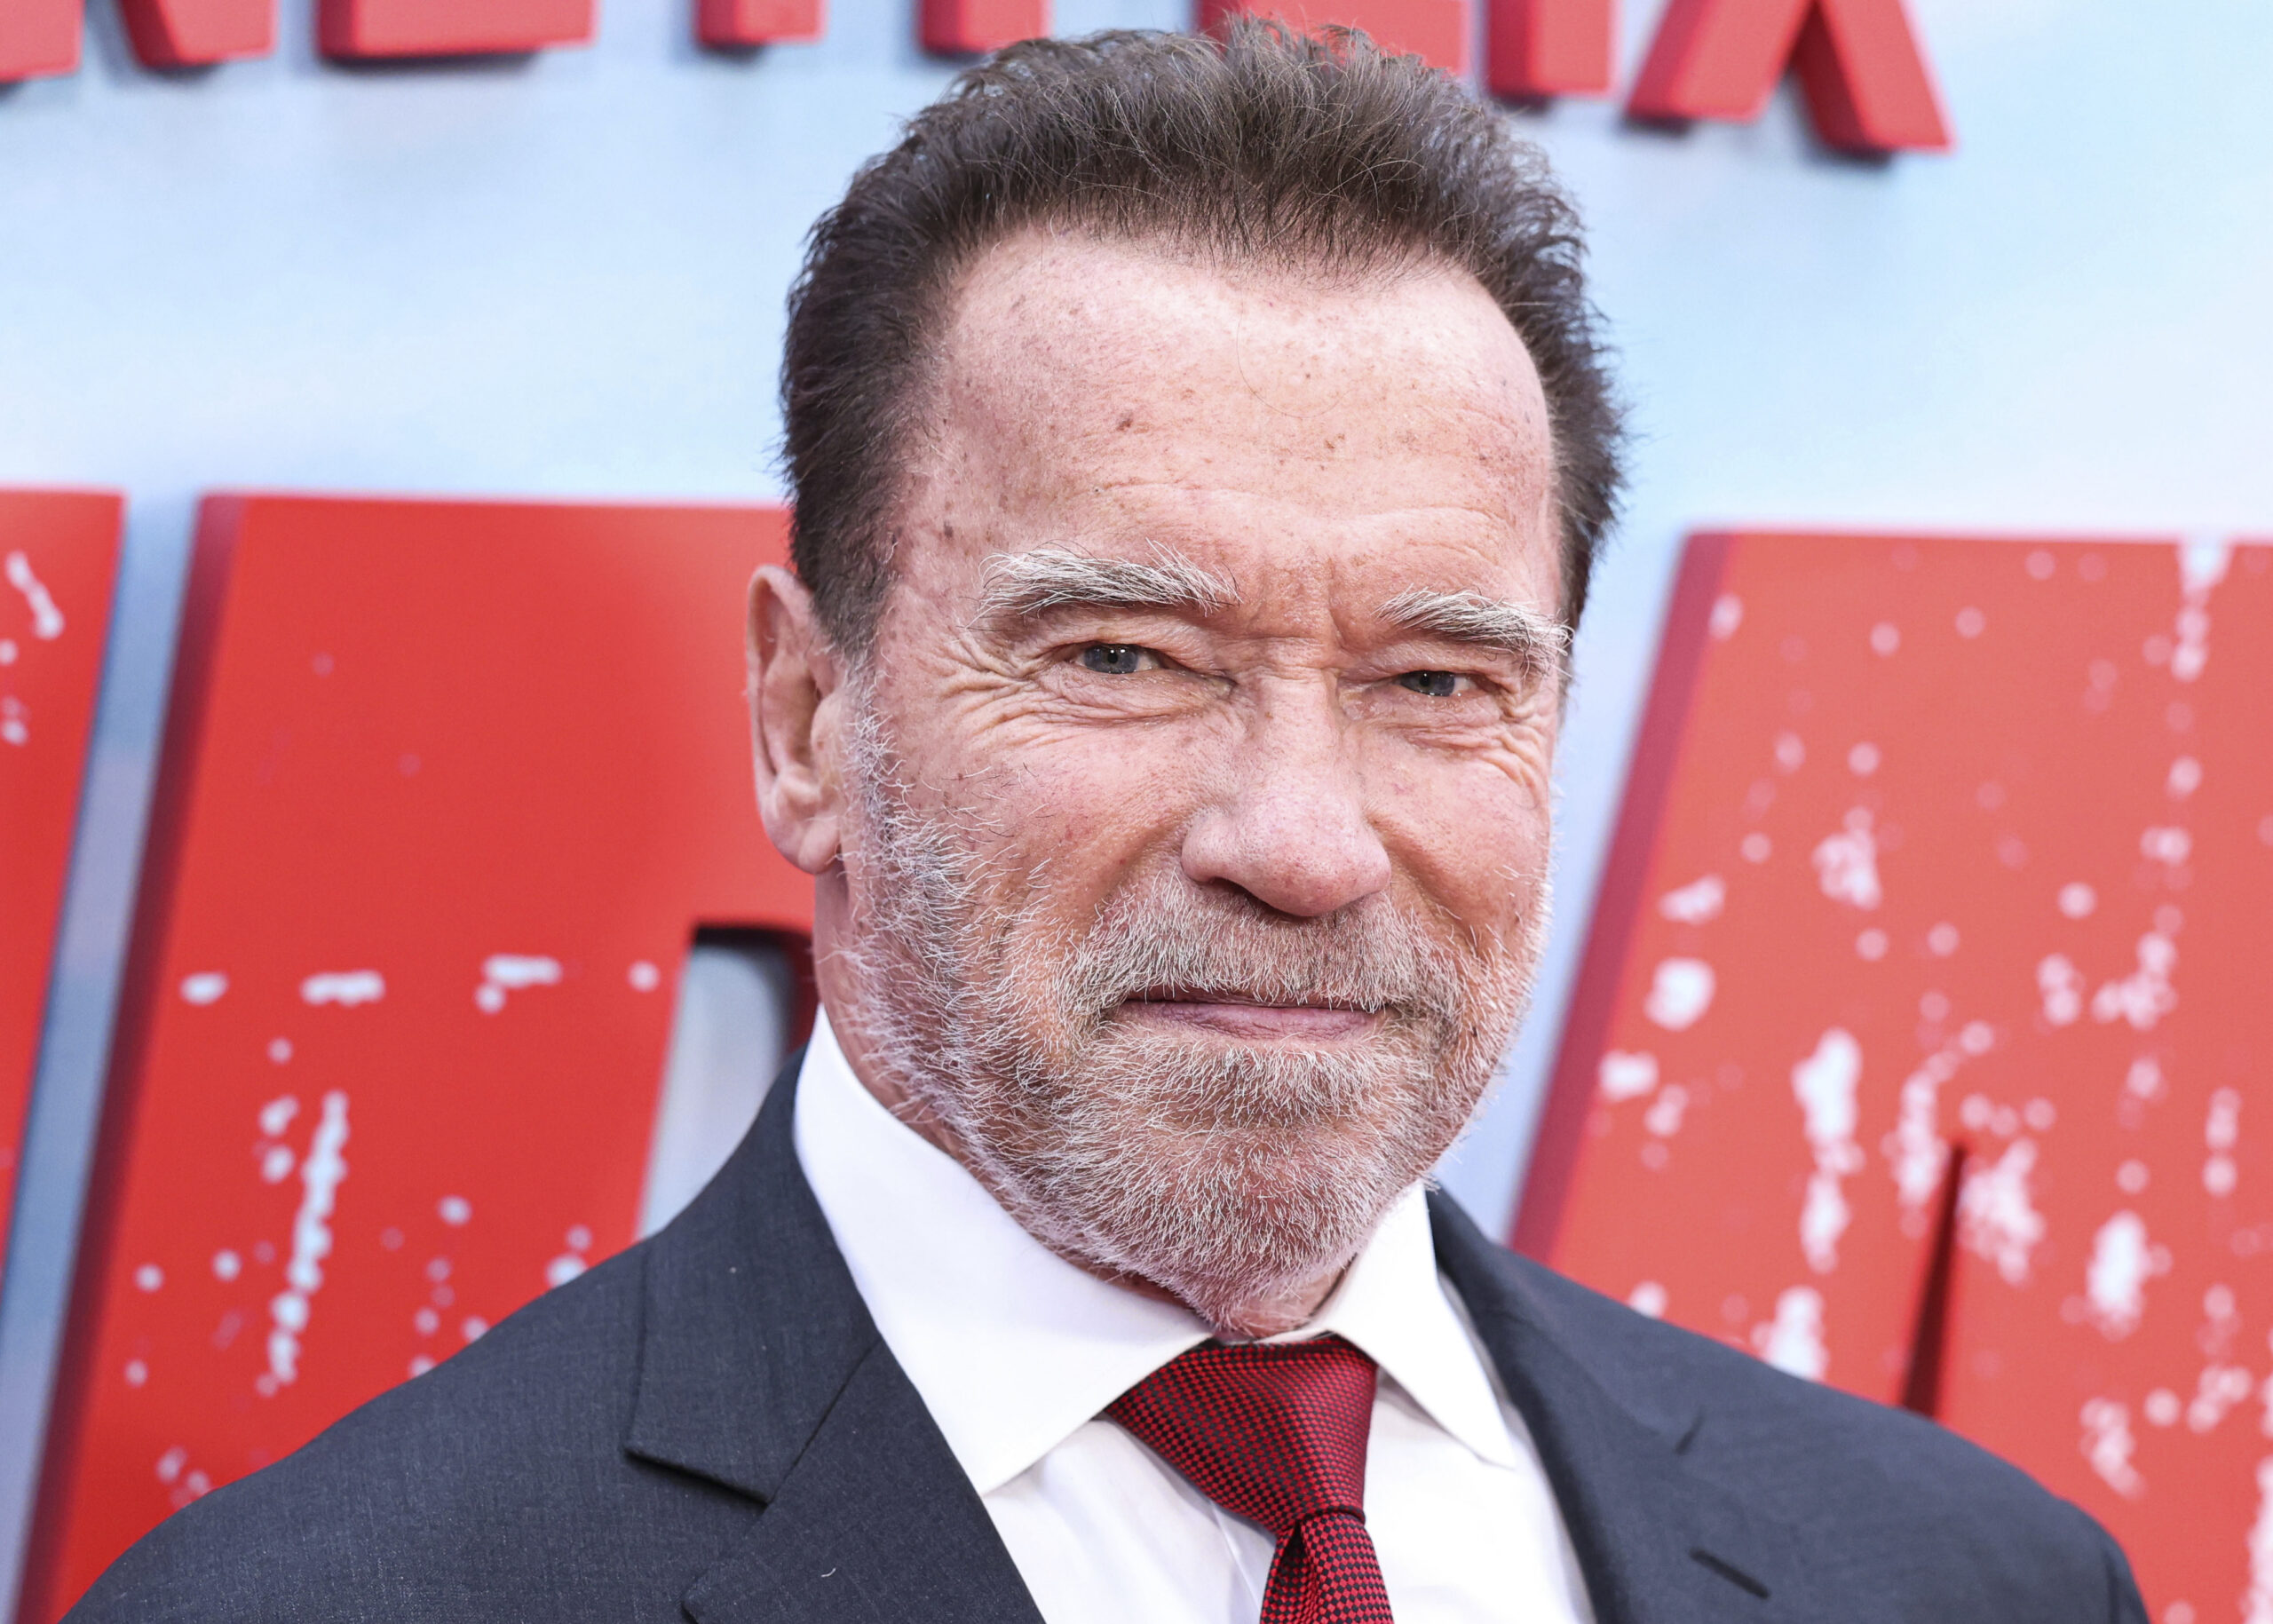 Arnold Schwarzenegger Detained at Airport Over Expensive Watch: ‘An Incompetent Shakedown’ (mediaite.com)